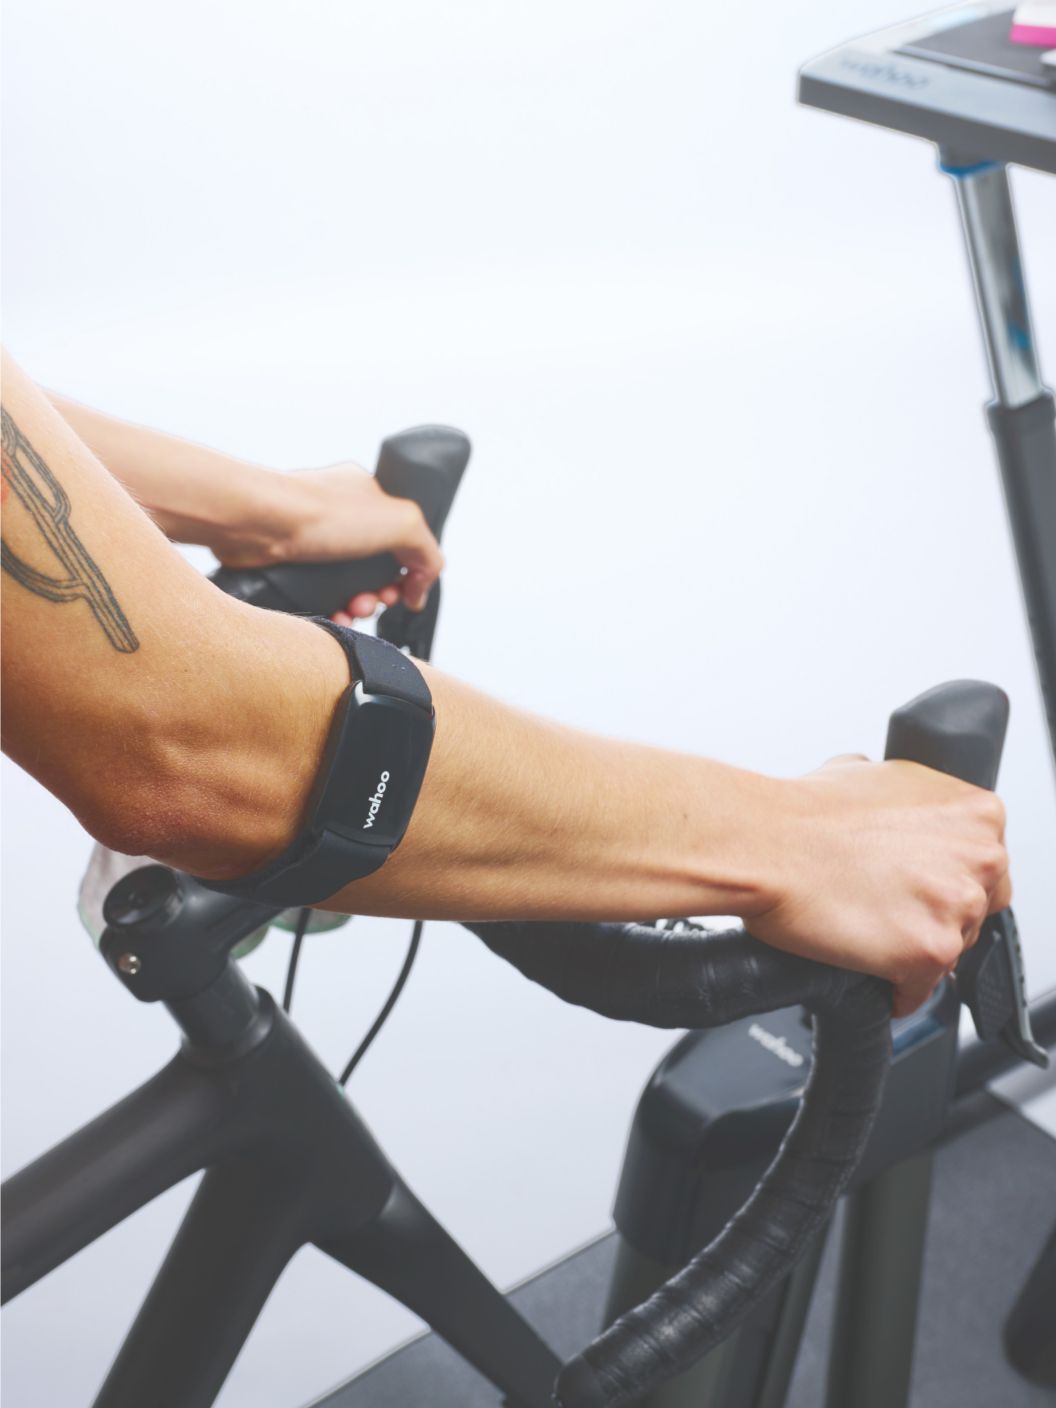 A closeup of Wahoo’s TICKR FIT optical heart rate monitor located on a rider’s arm as they train indoors using Wahoo’s indoor training ecosystem.